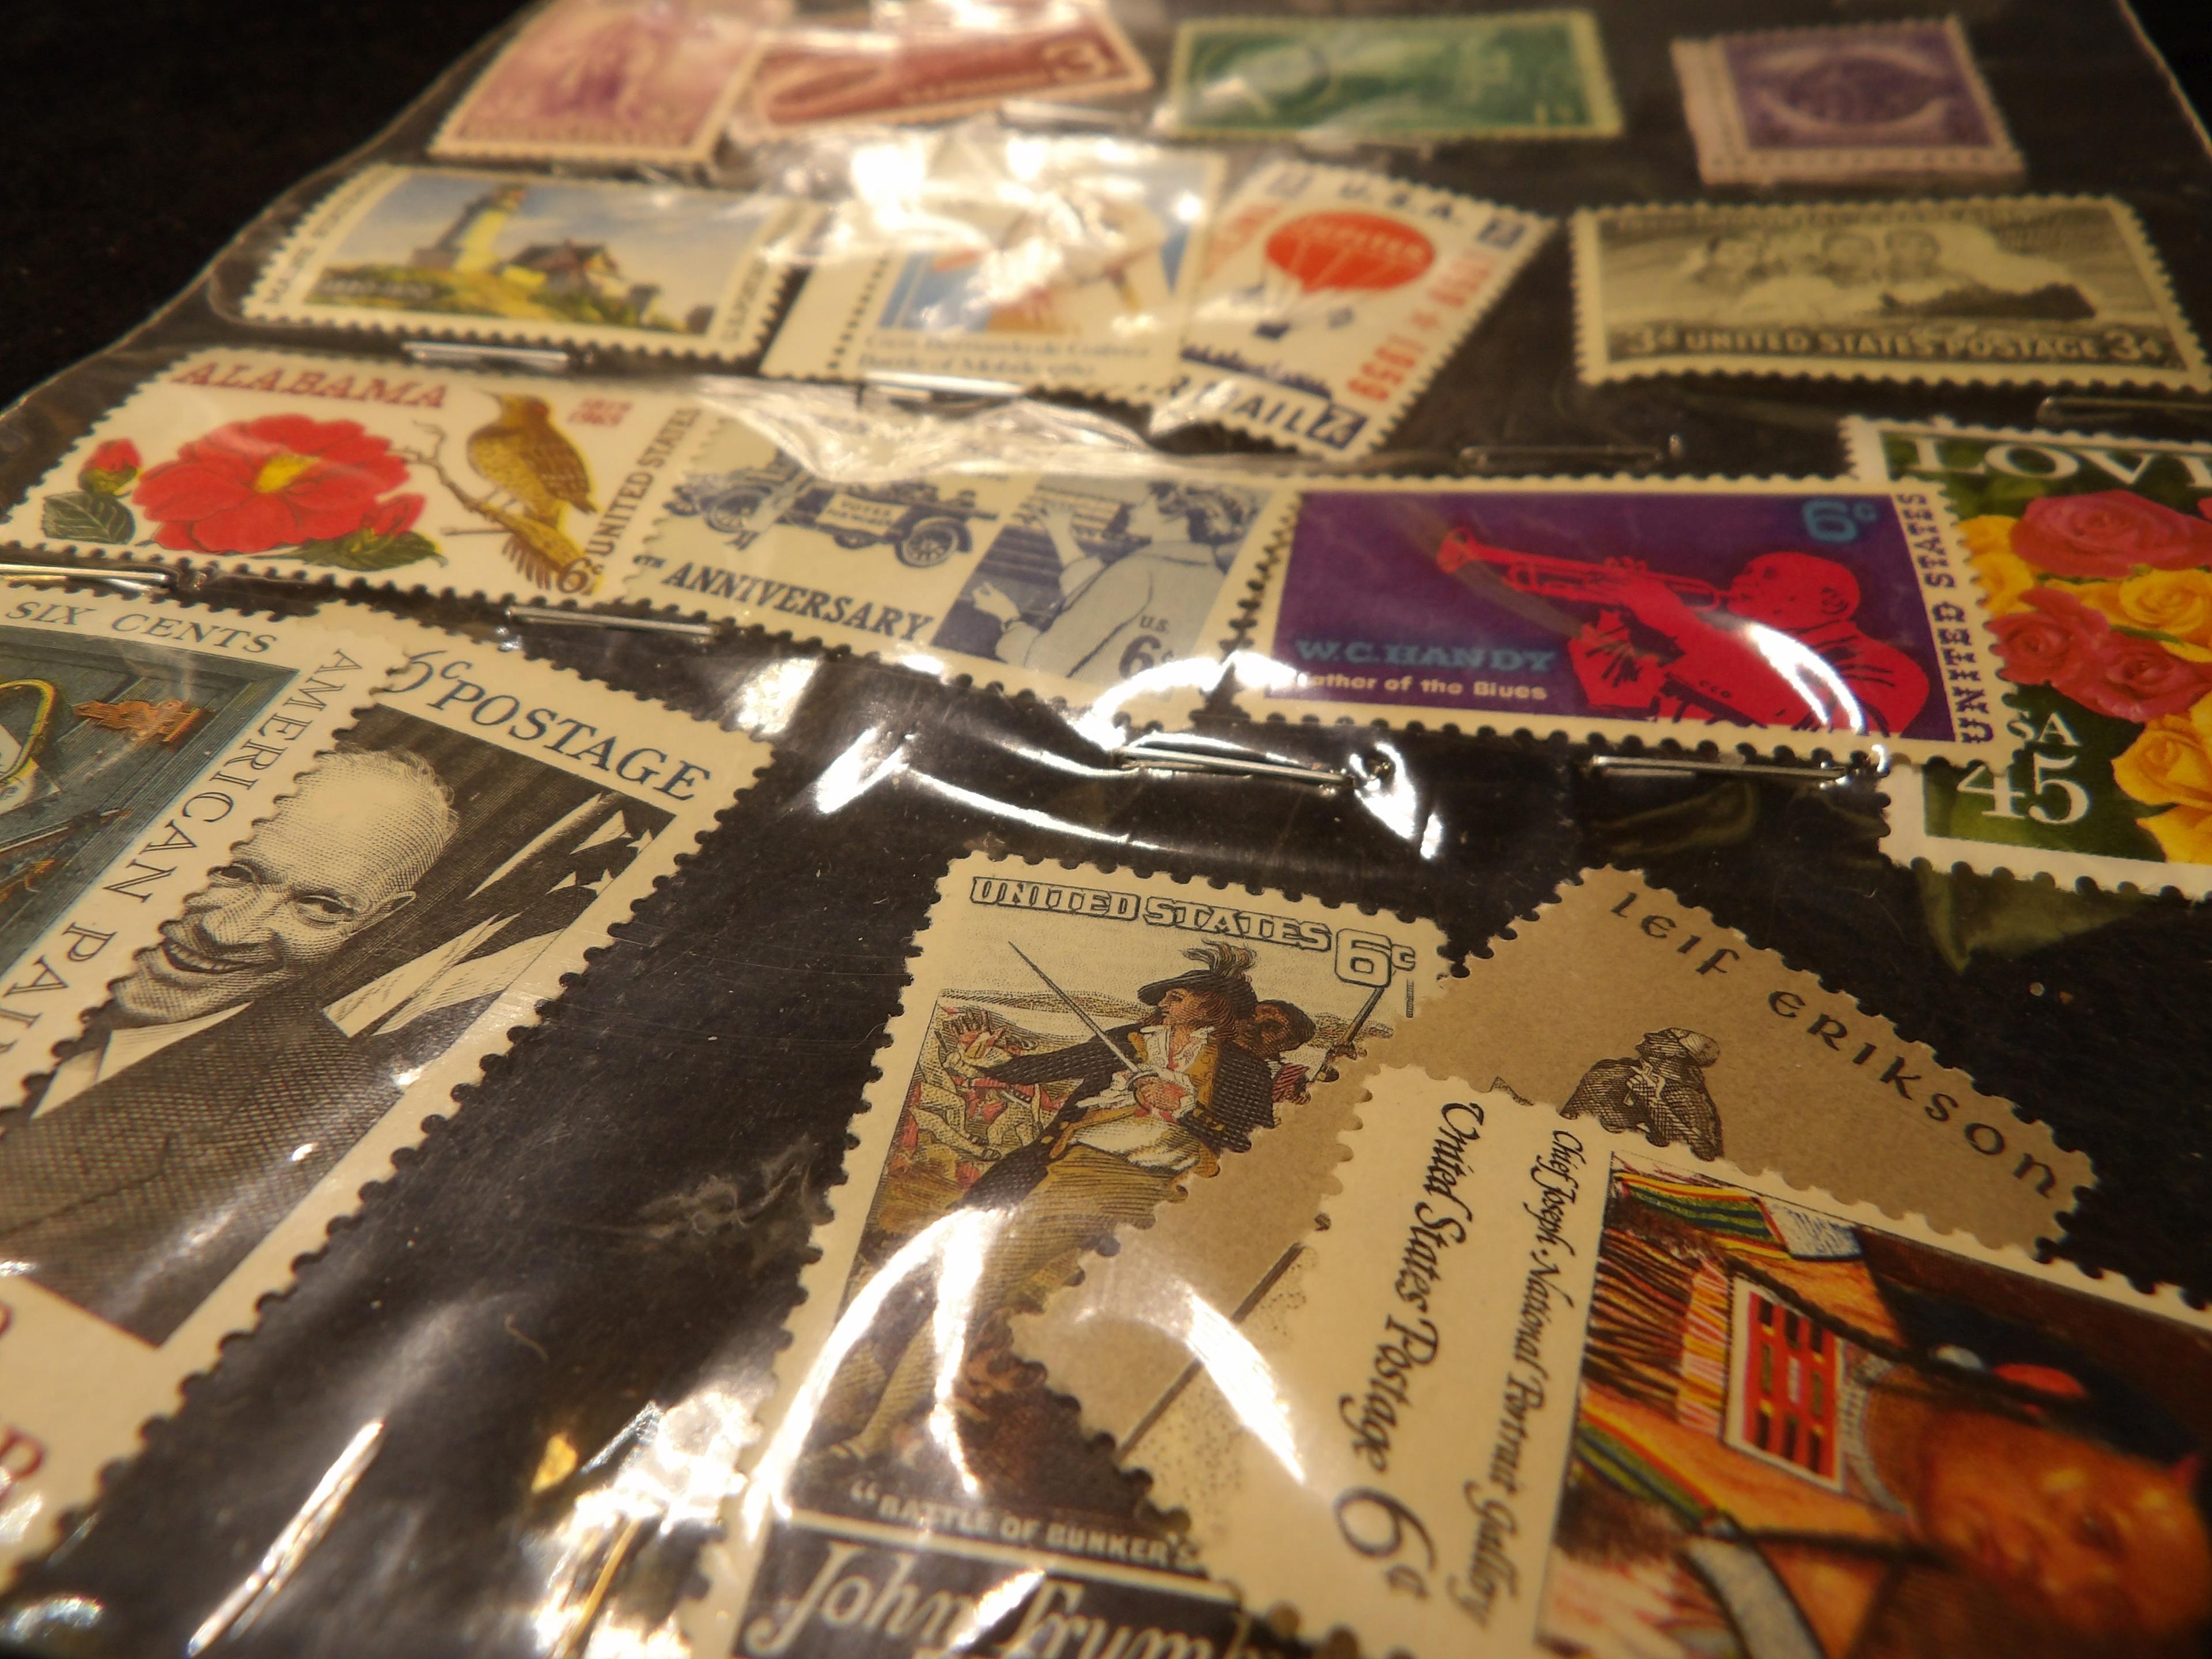 Pack of 17 Mint U.S. Stamps with a face value orf $1.34.